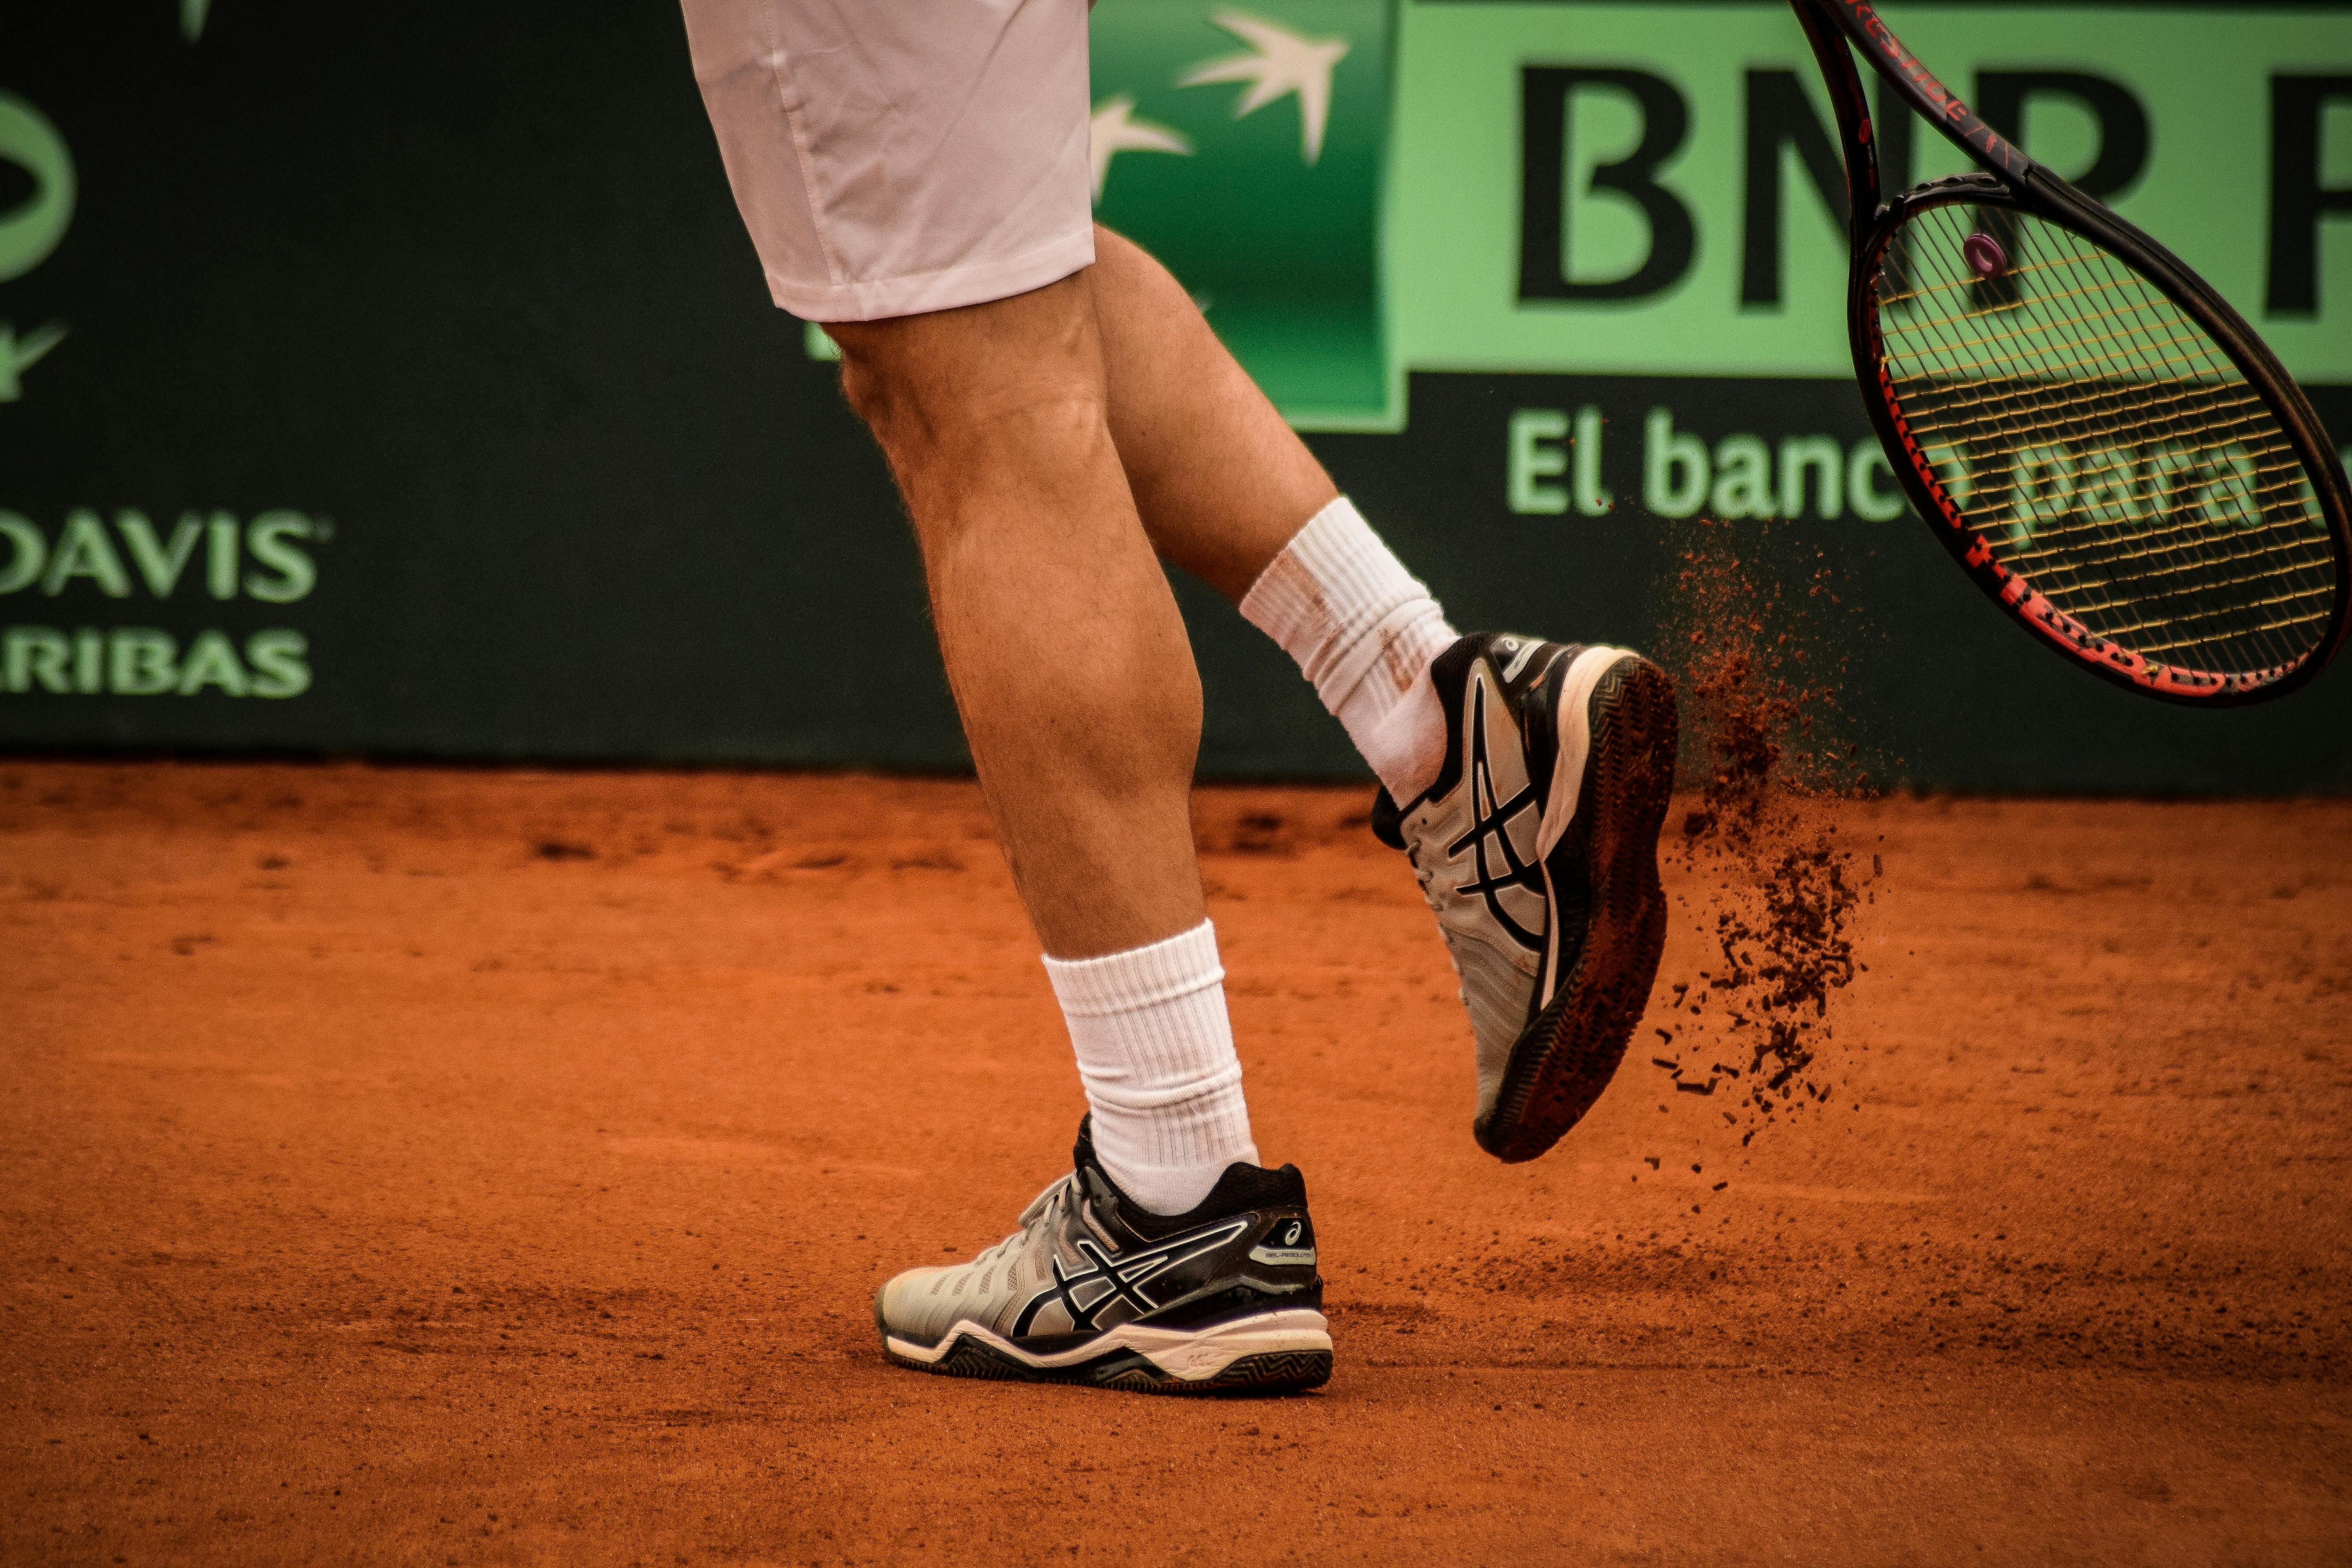 clay court shoes on hard court